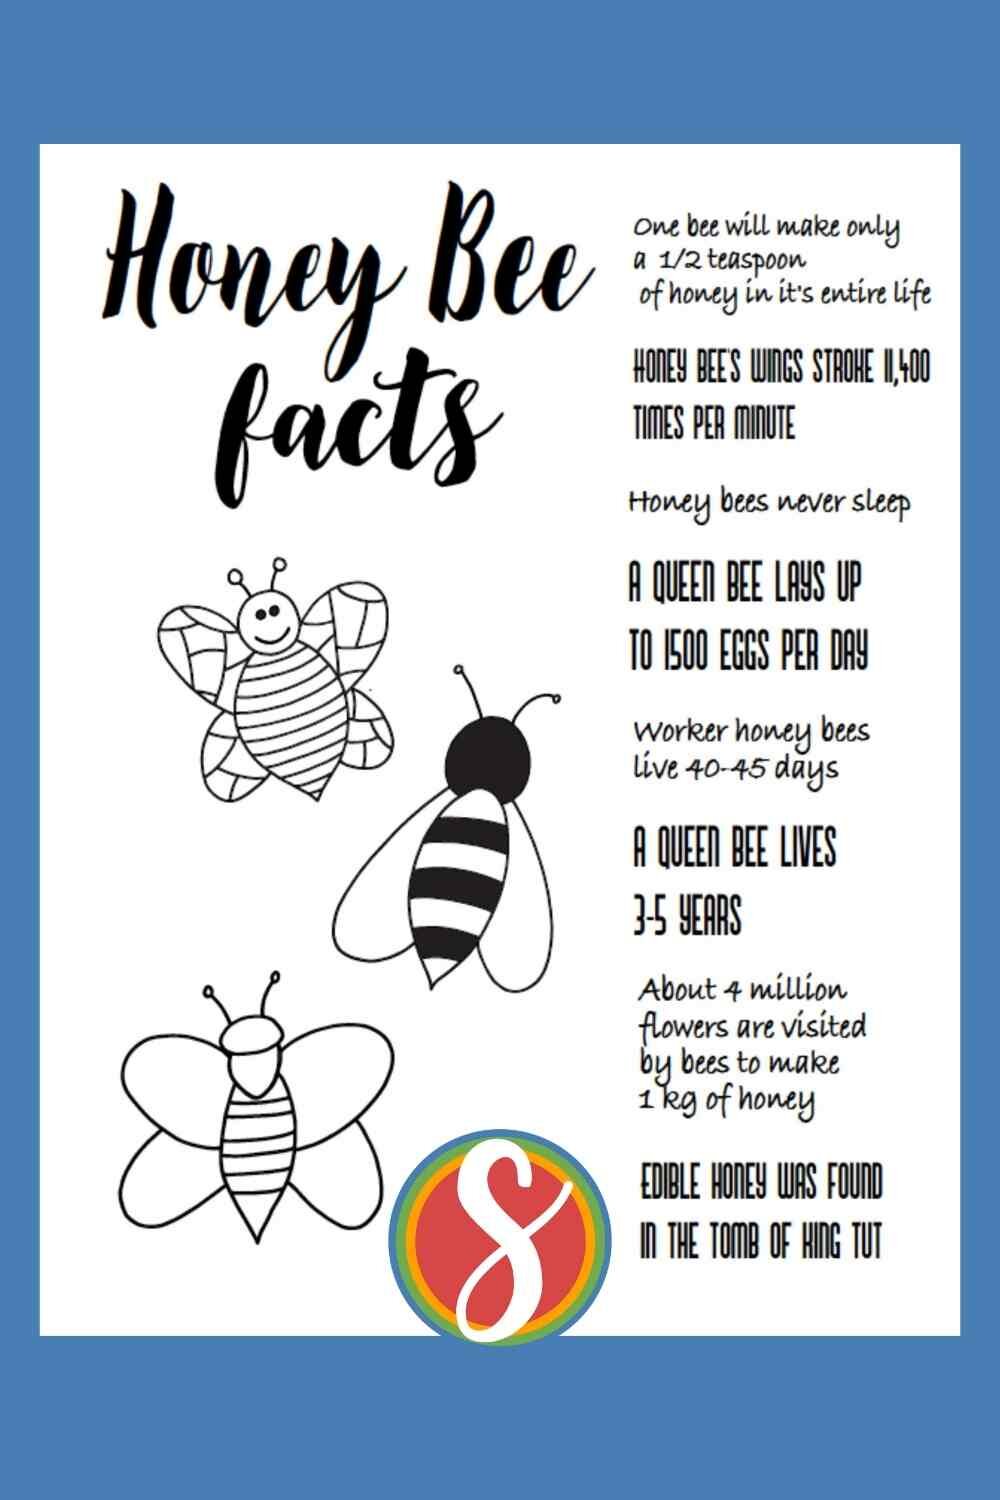 Free honey bee coloring page with honey bee facts - free printable coloring page about honey bees from Stevie Doodles